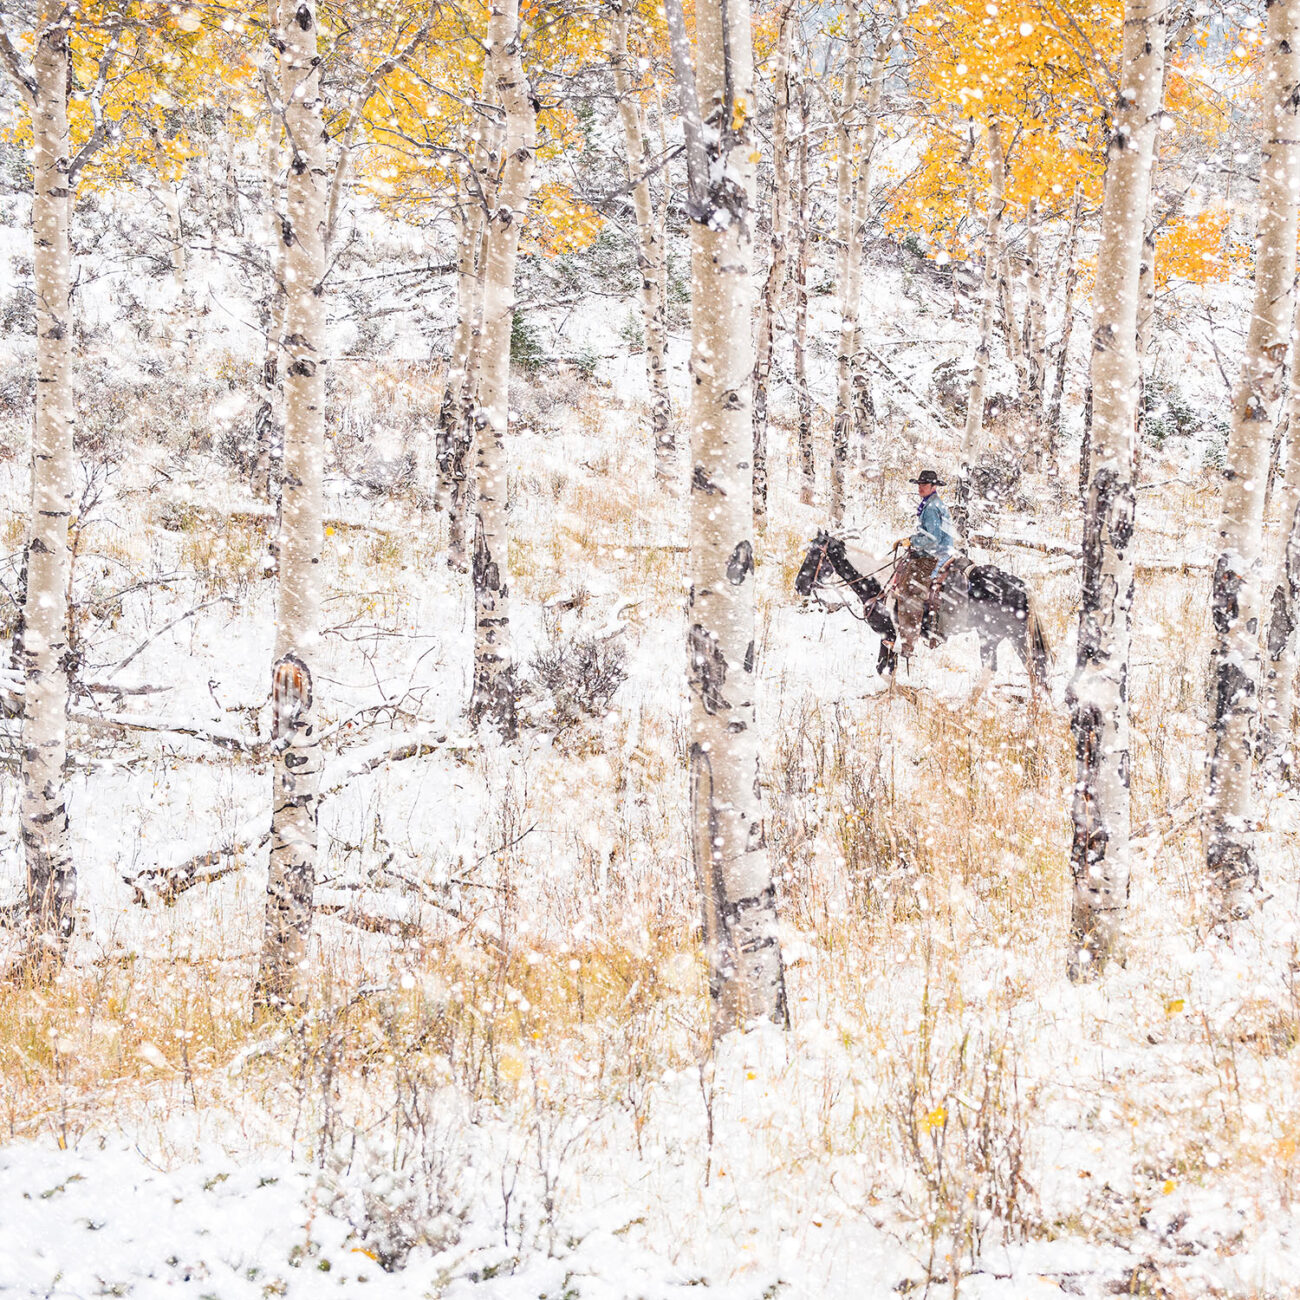 Early snow among the aspens